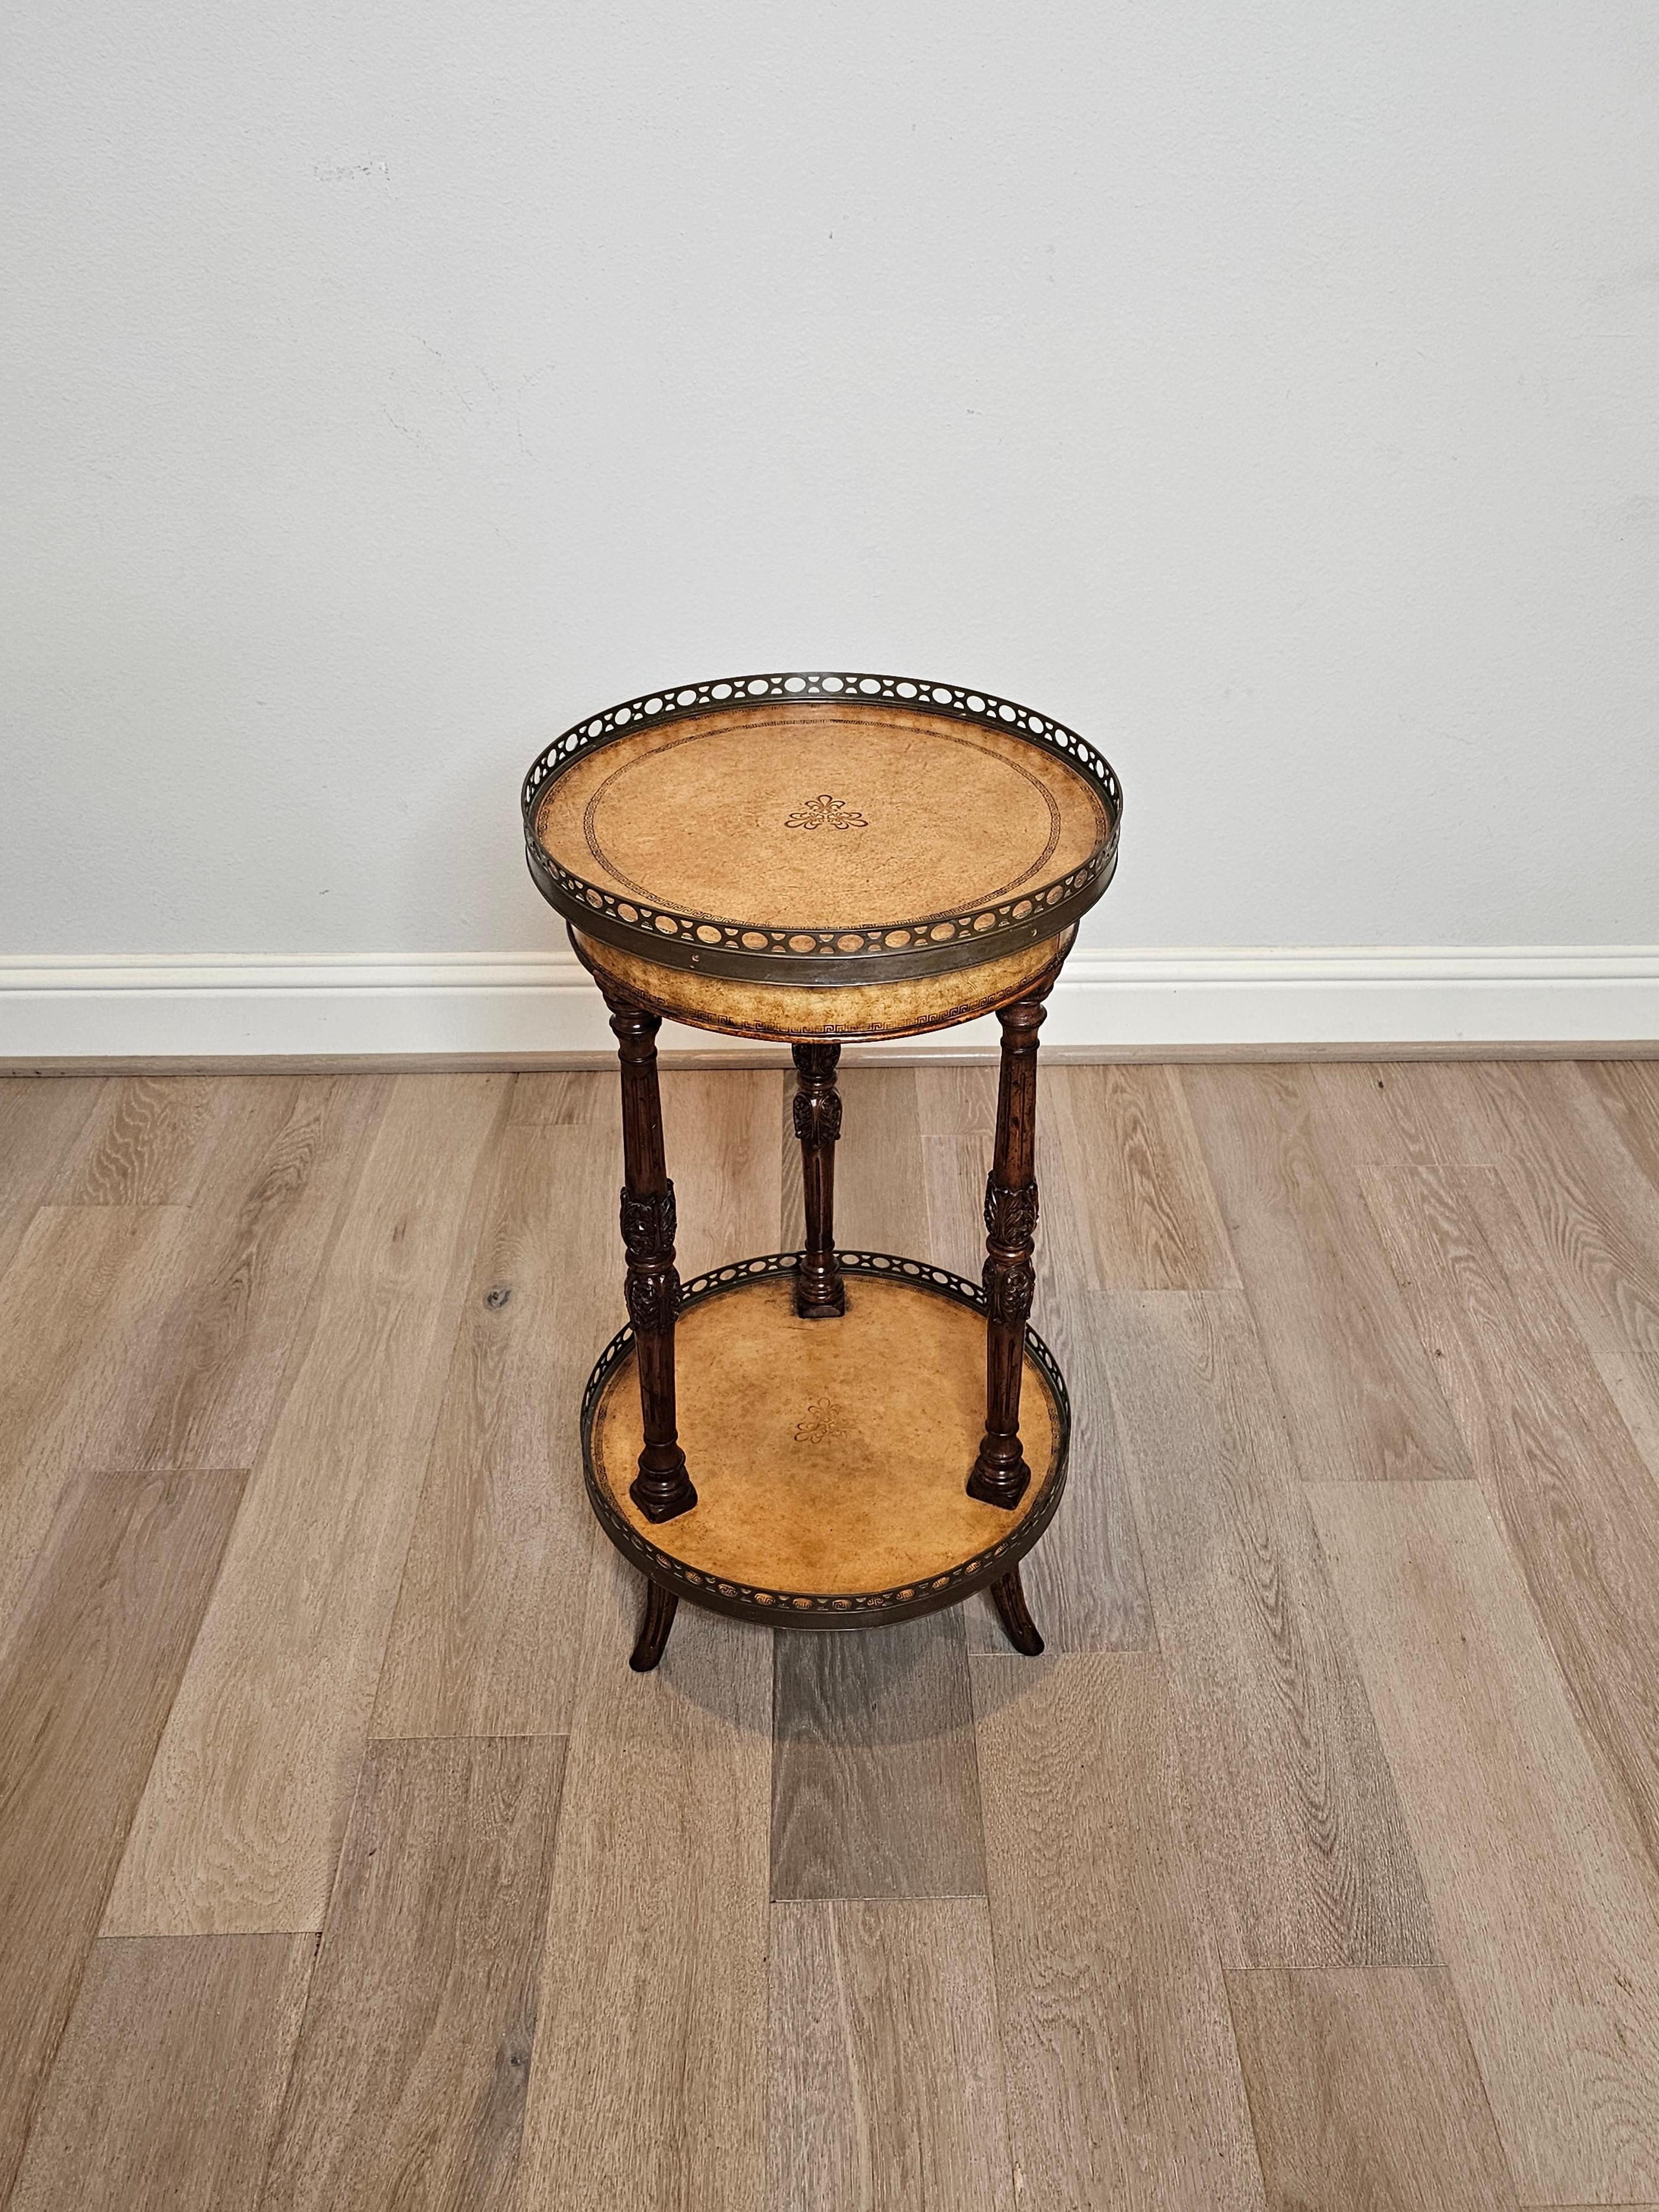 A lovely Regency style two-tier side table, attributed to fine quality luxury designer Theodore Alexander, late 20th century.

Having round tan leather tops with embossed Greek key border and Bouillotte style raised pierced metal galleries, inset